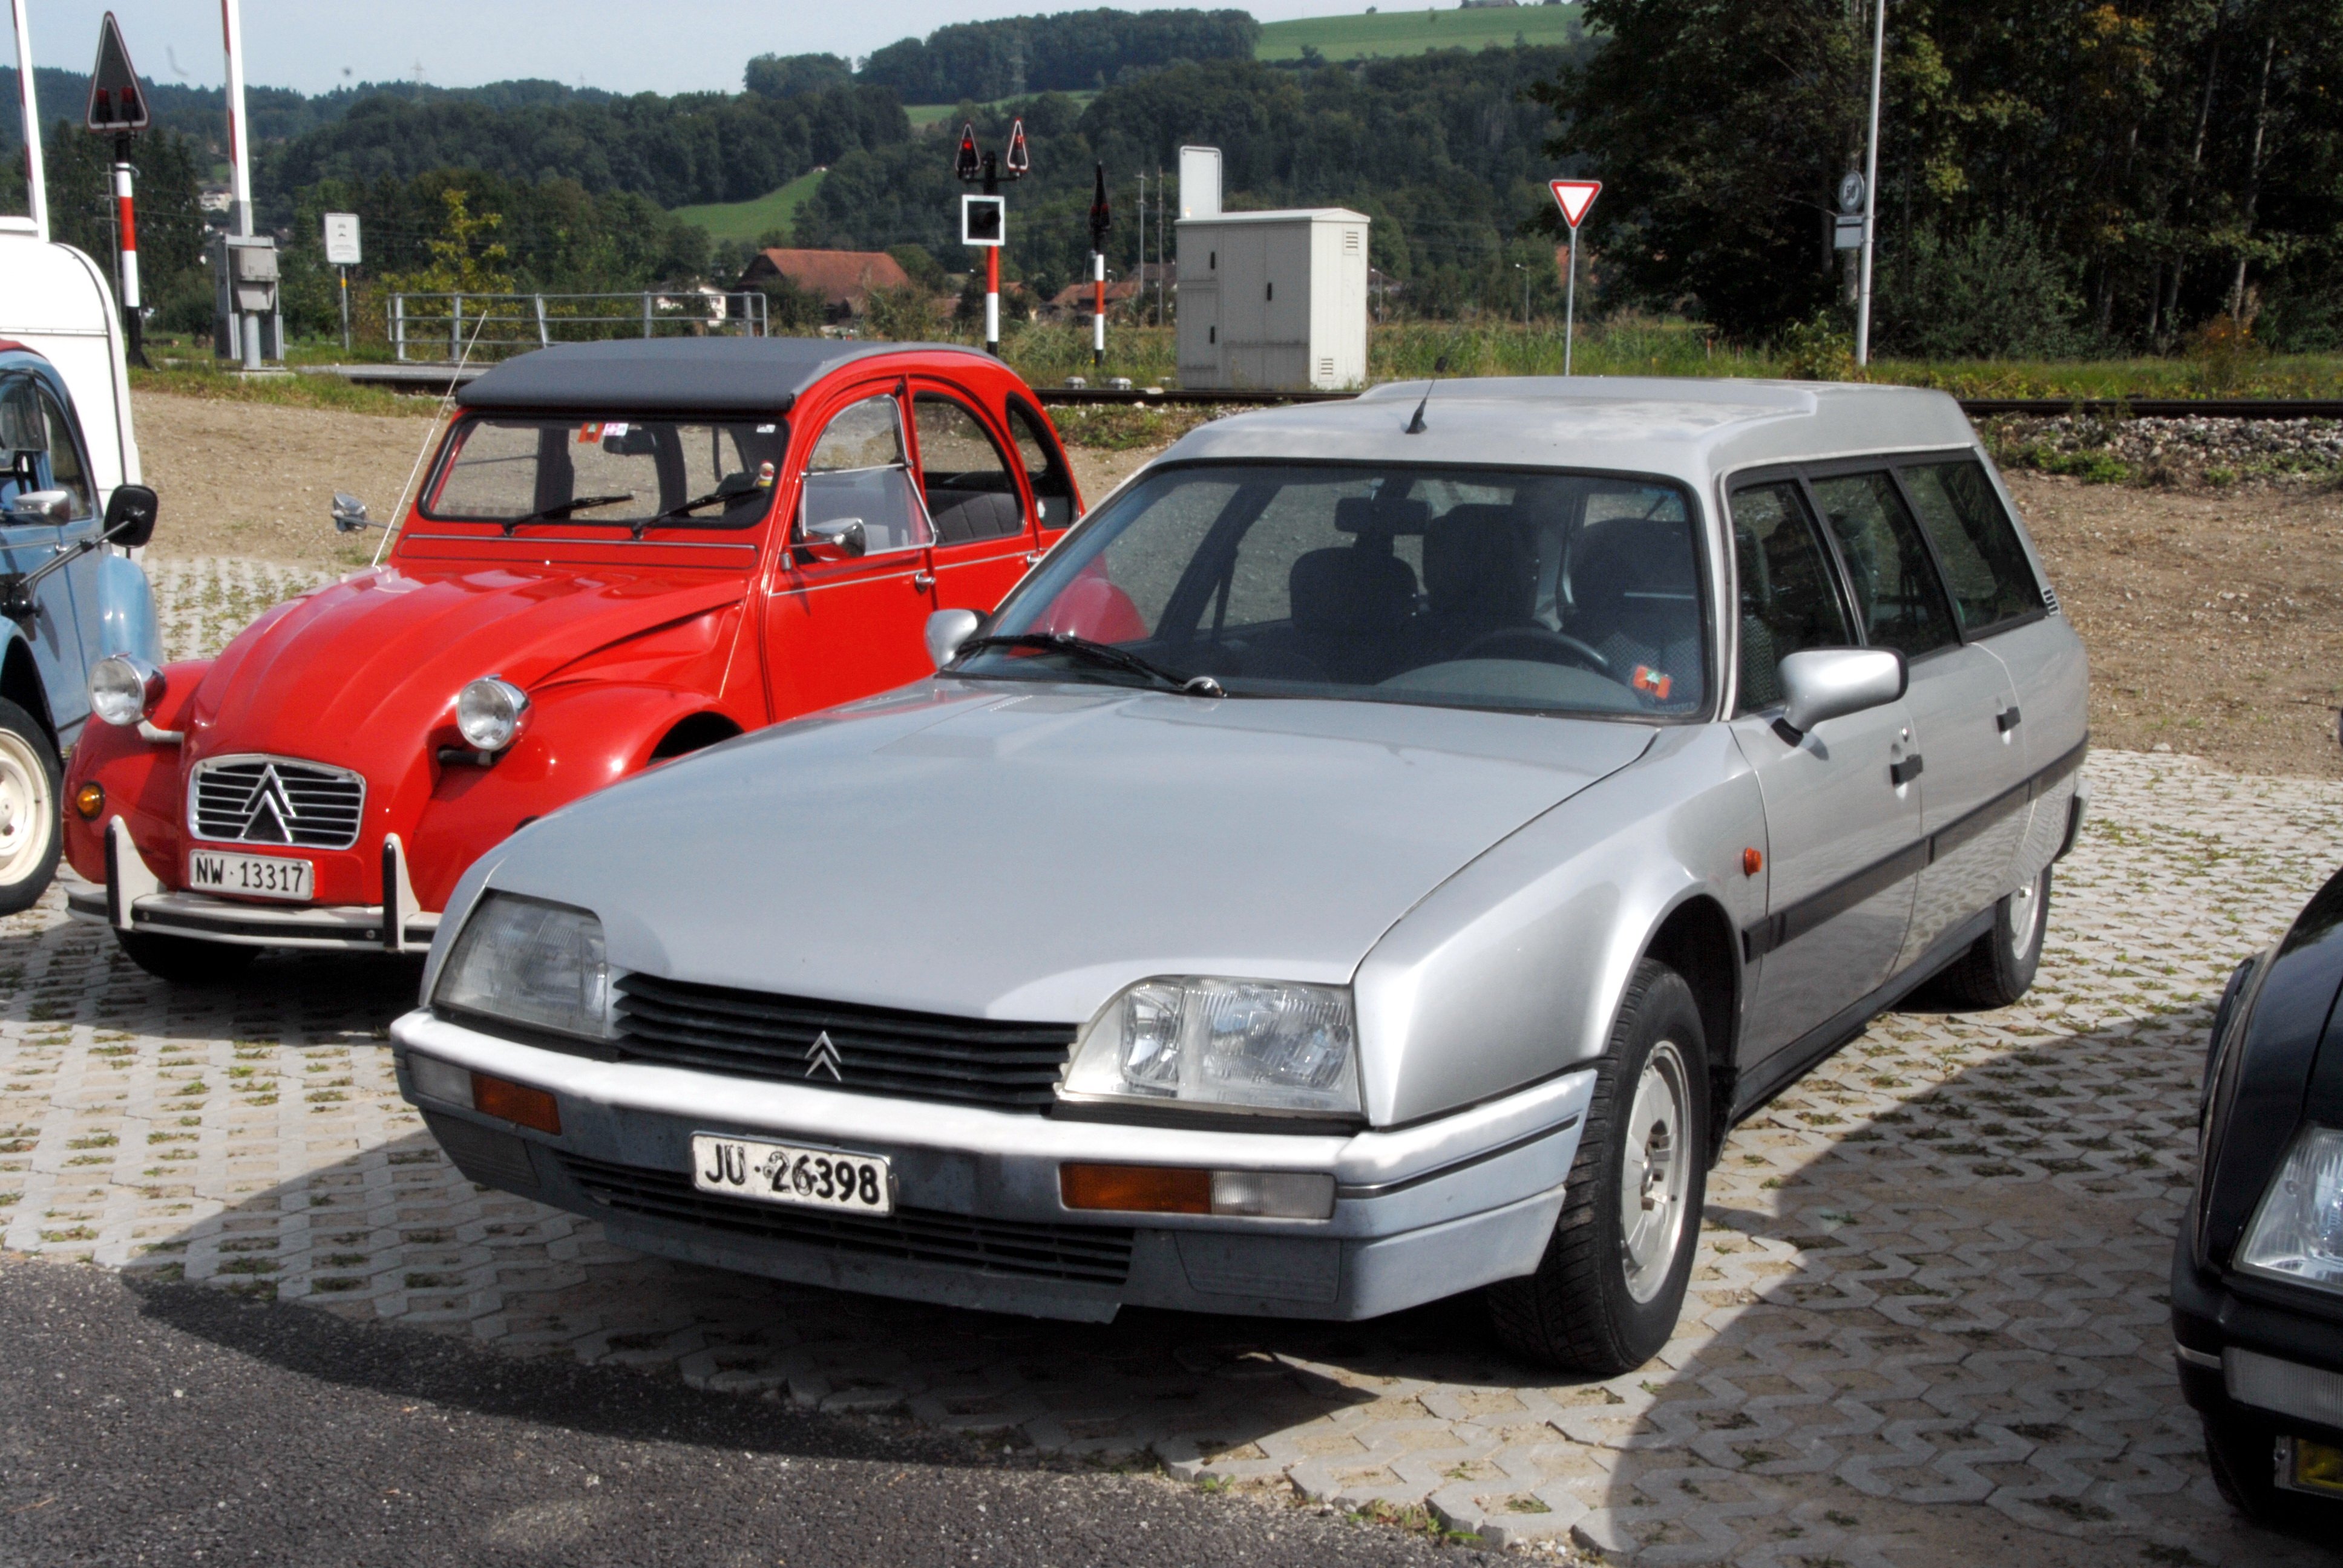 cx, Cars, Citroen, Classic, Delivery, French Wallpaper